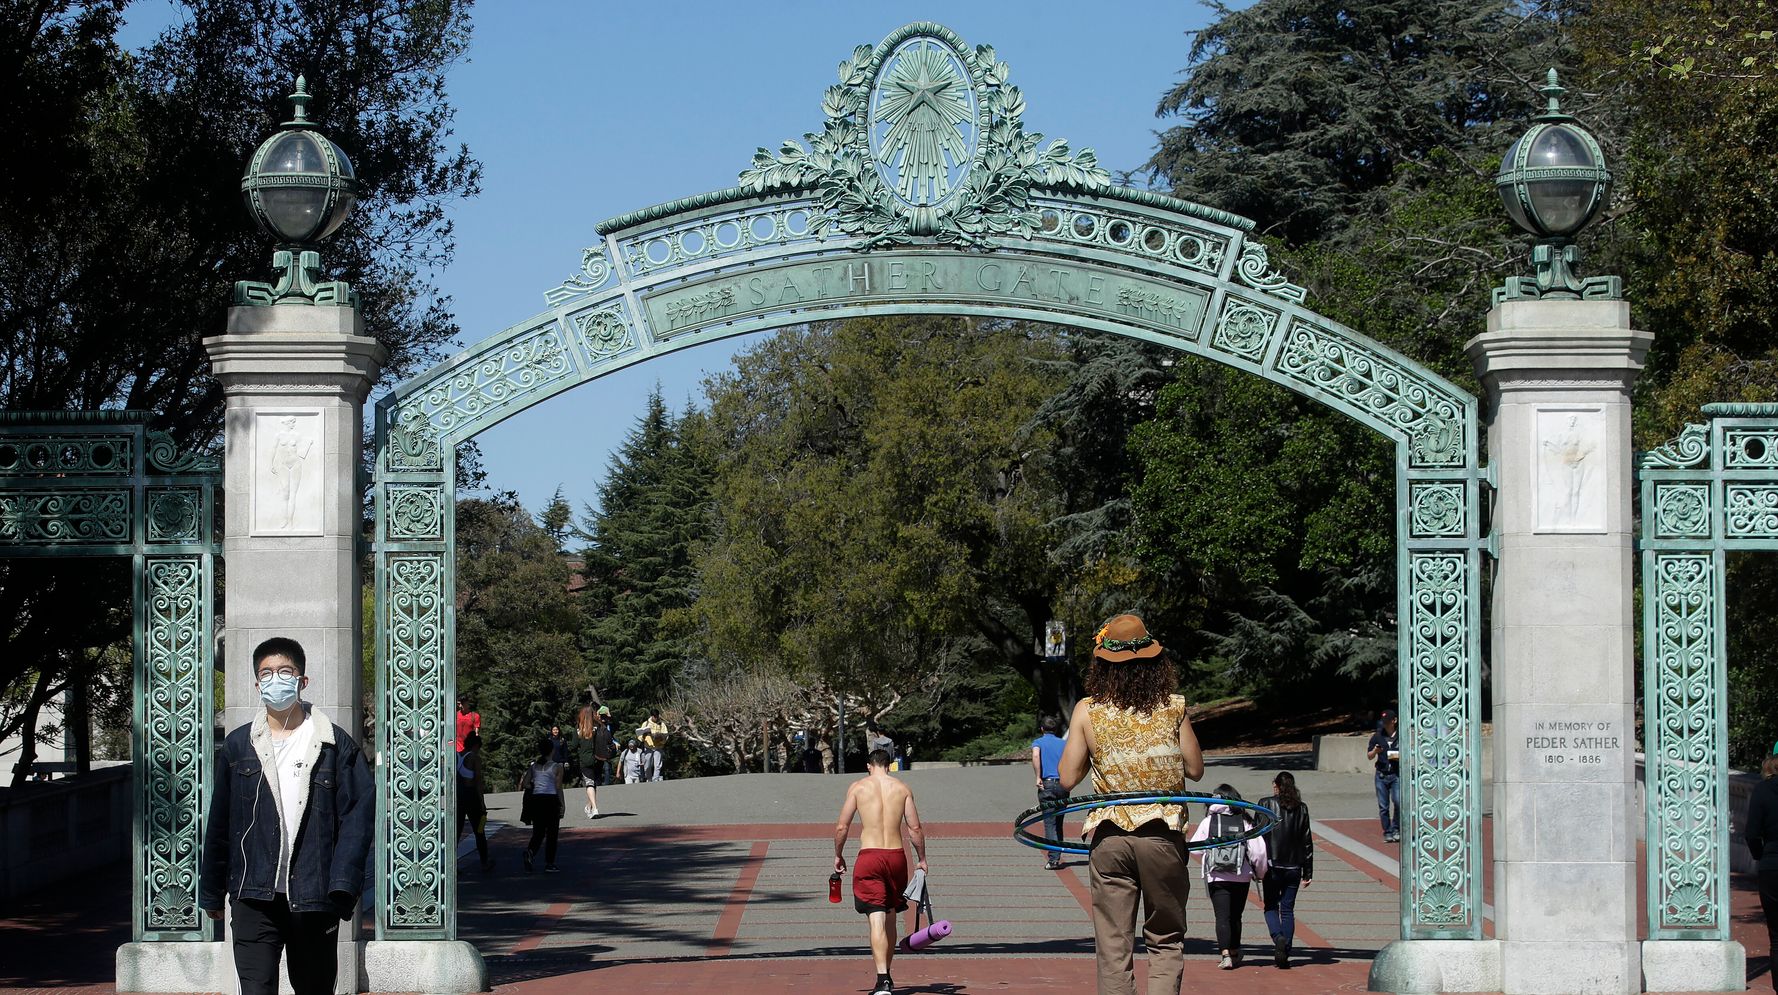 University Of California System To Eliminate SAT, ACT Requirements For